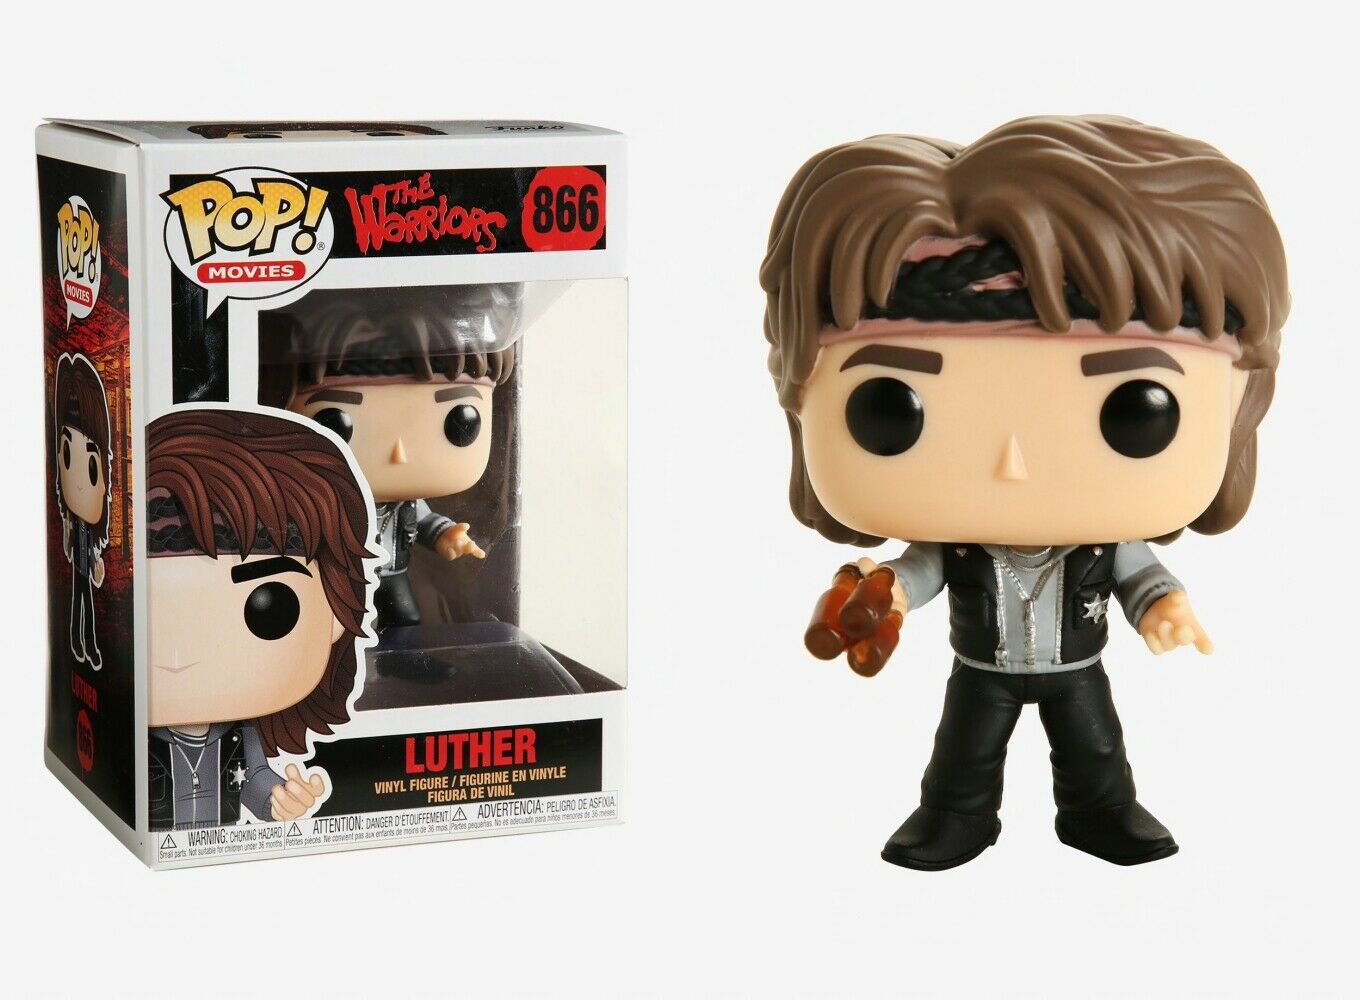 HOT SELLER Funko Pop Movies: The Warriors - Luther Vinyl Figure